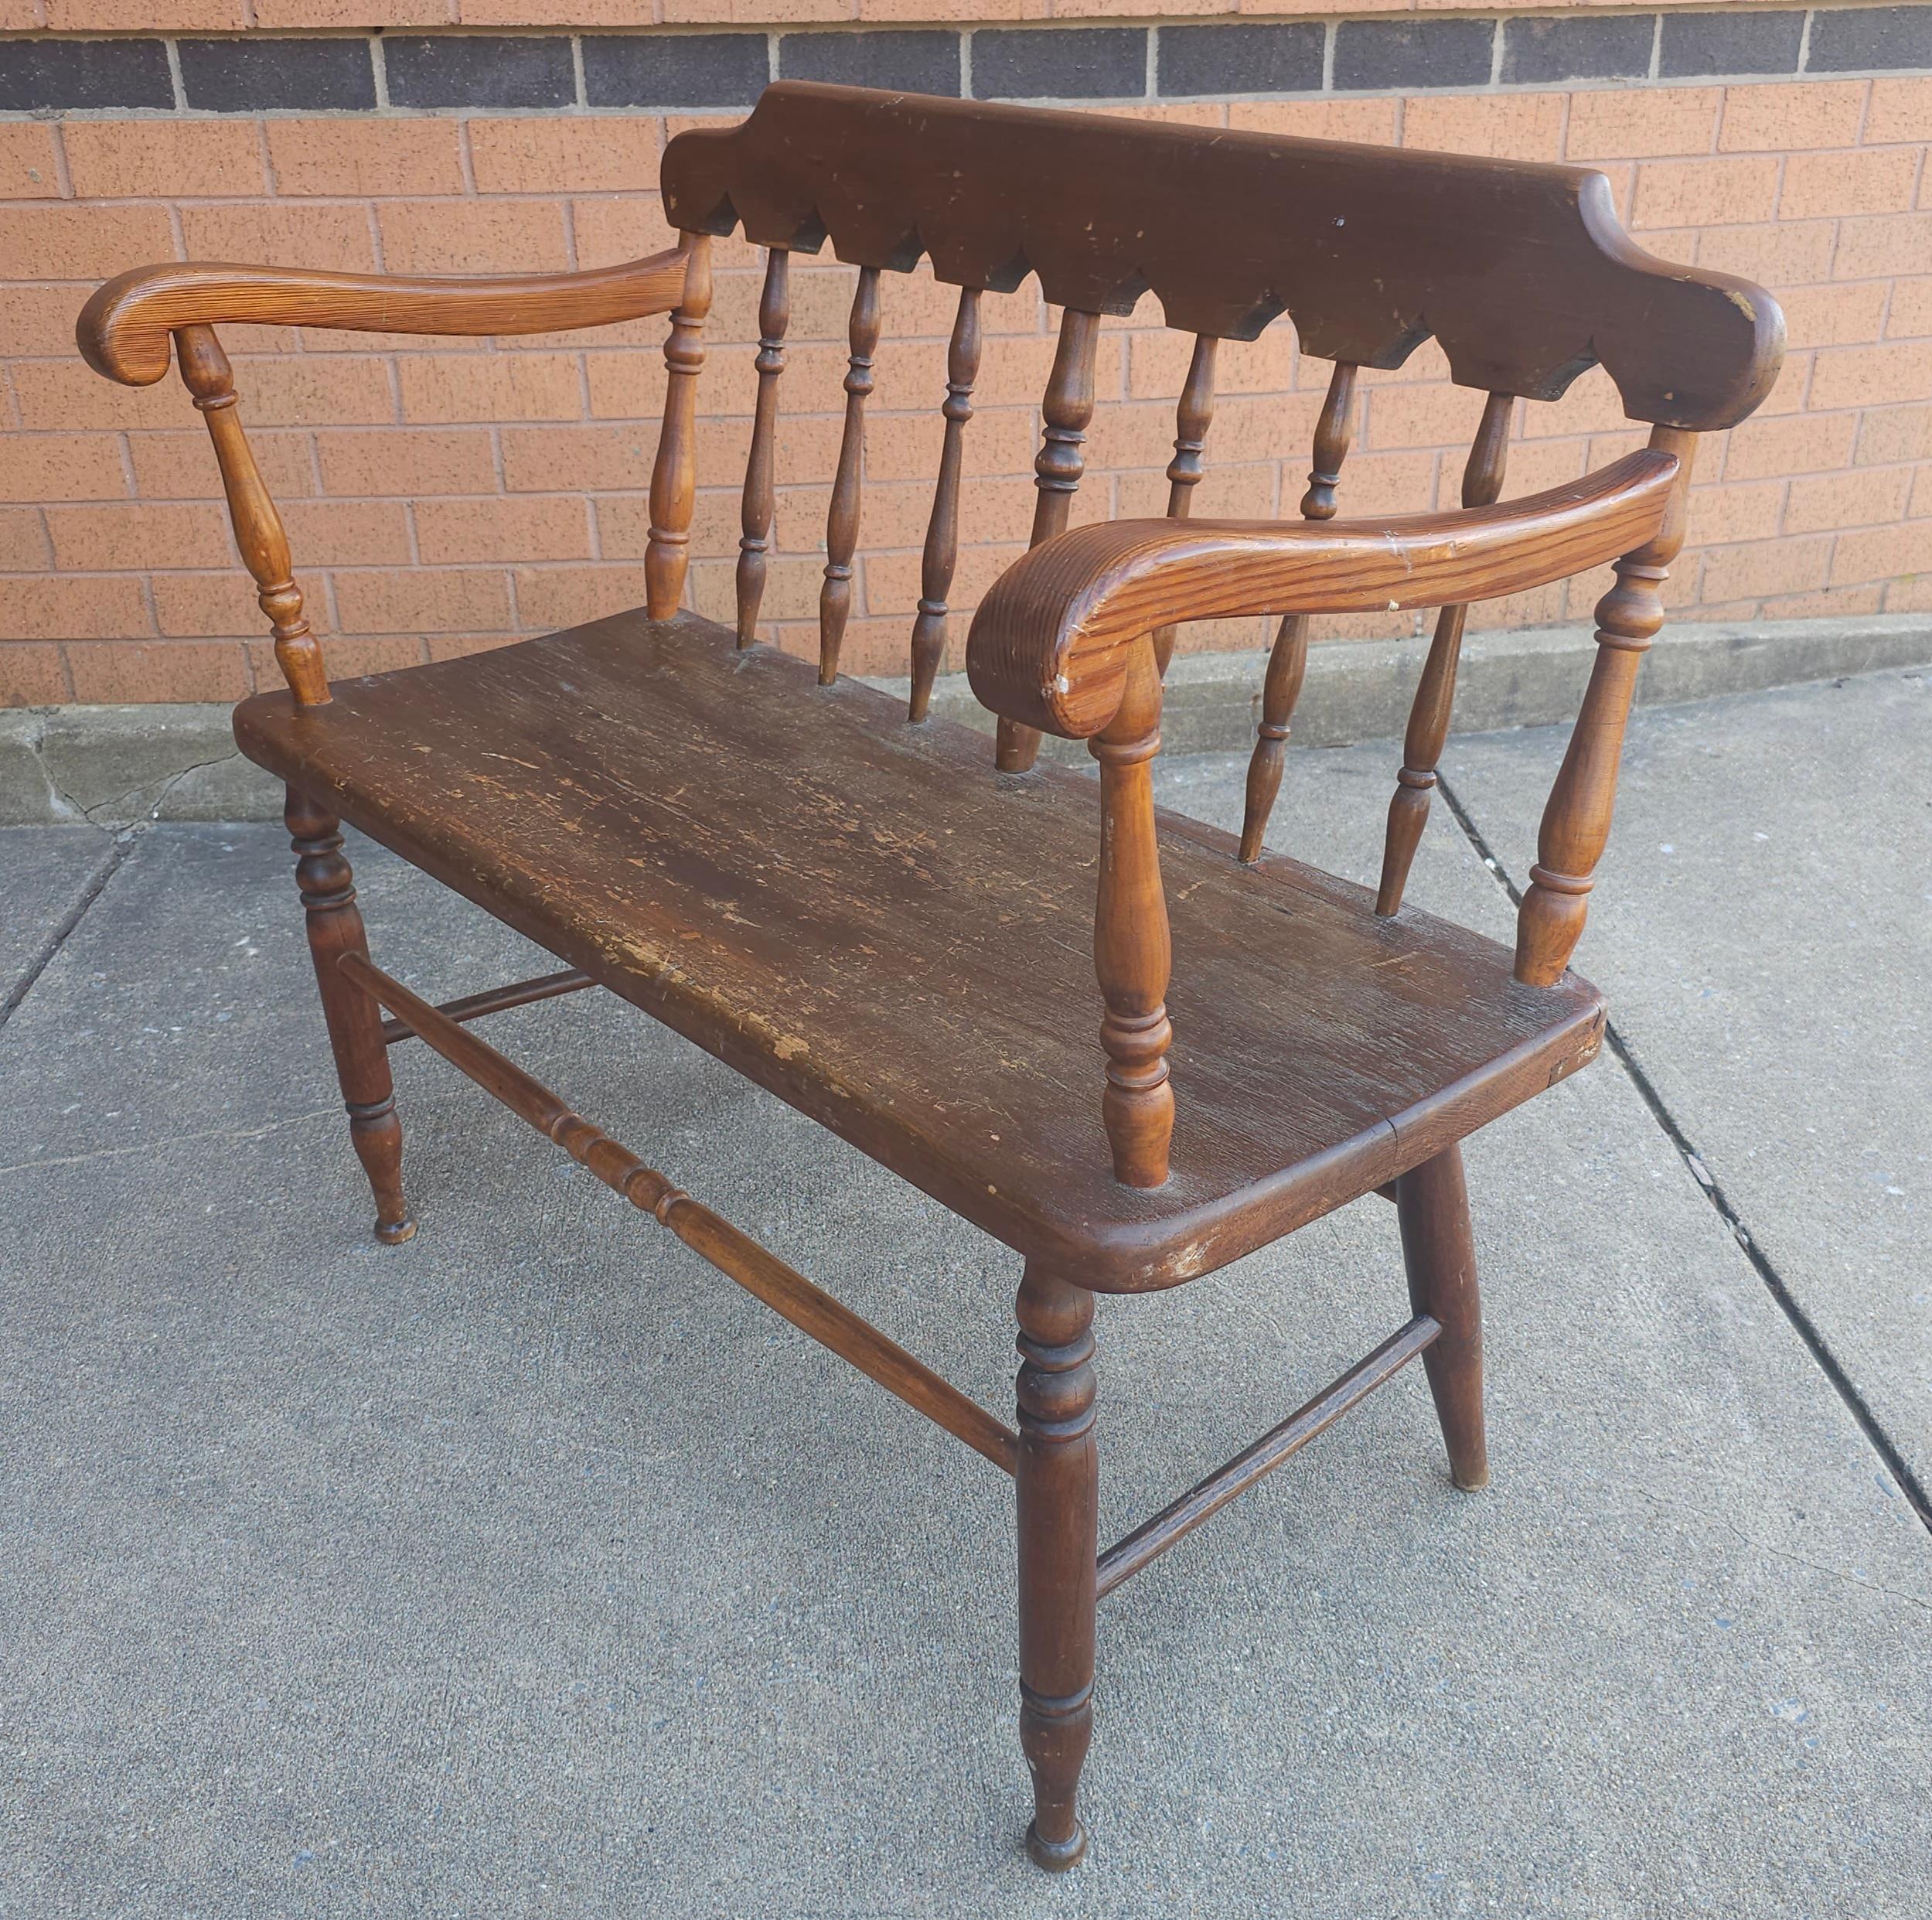 An Early American Style two seater bench measuring 36.5